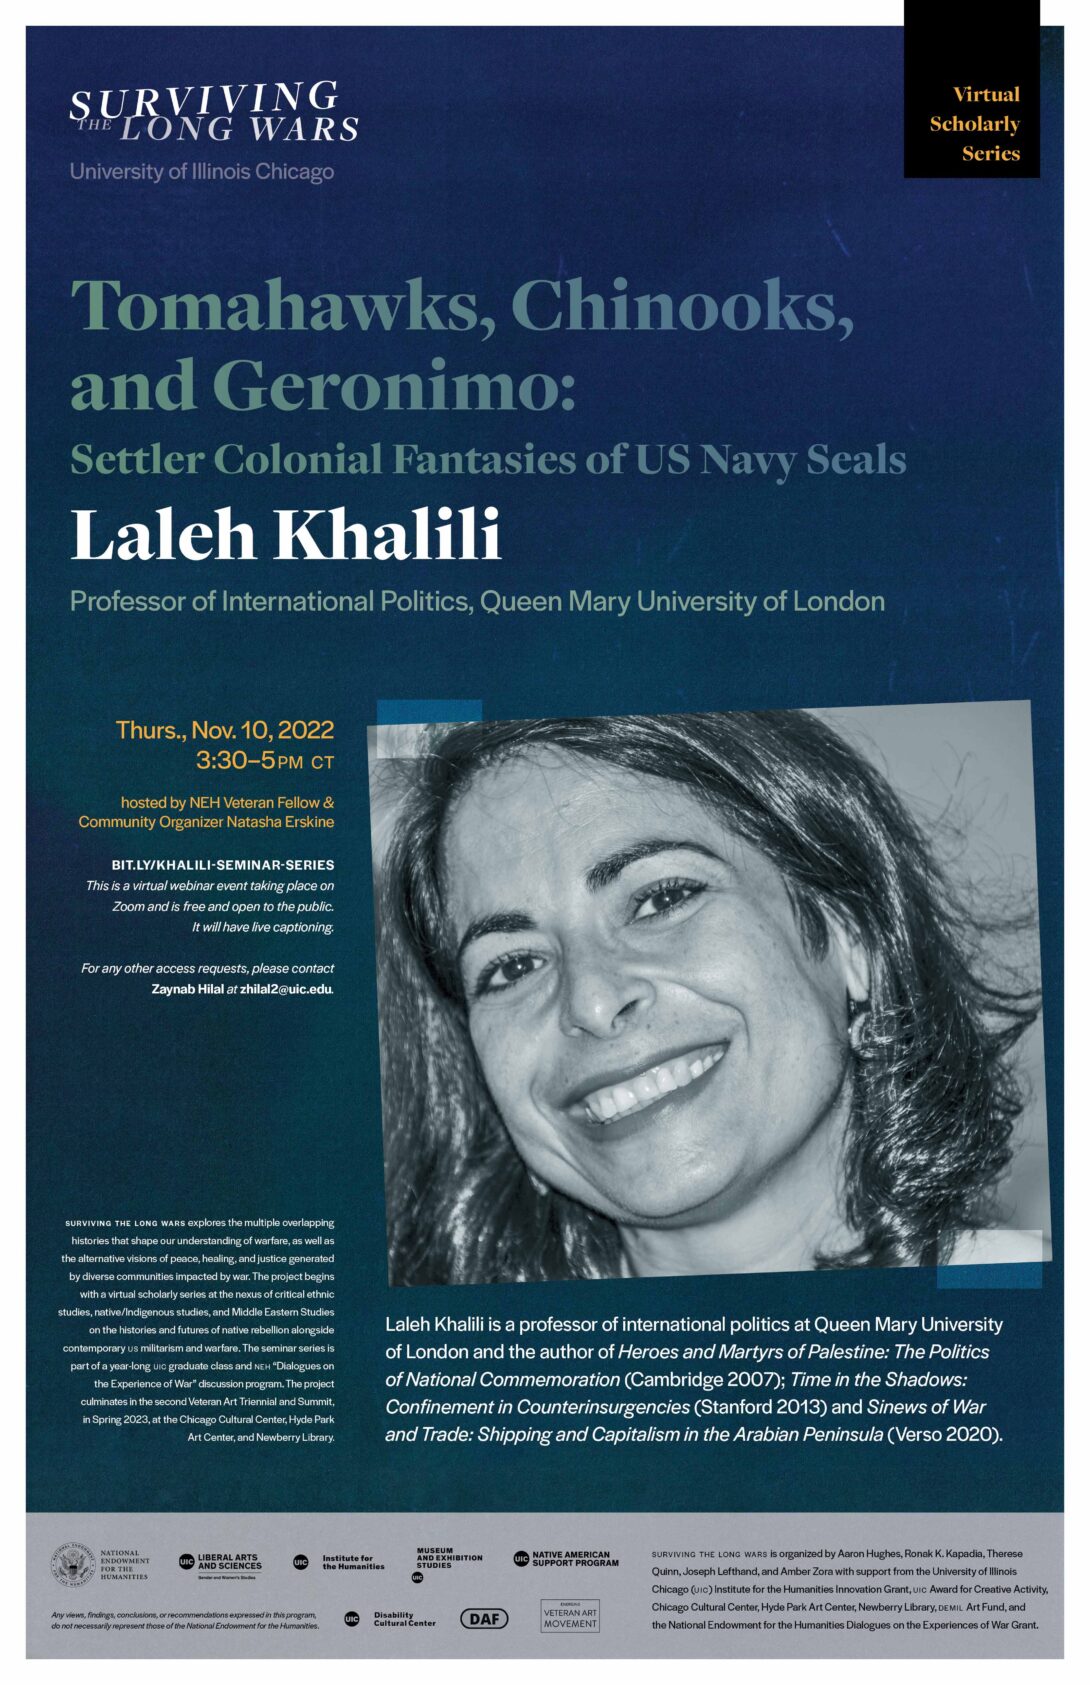 A dark blue poster with white text announcing a virtual lecture by Professor Laleh Khalili on Thursday, November 10th. The project’s title 'Surviving the Long Wars' is written in large text at the top of the flyer along with the Scholar Series’s title “Tomahawks, Chinooks, and Geronimo: Settler Colonial Fantasies of US Navy Seals”. The poster has a headshot of Professor Khalili, her bio, and details about the series.